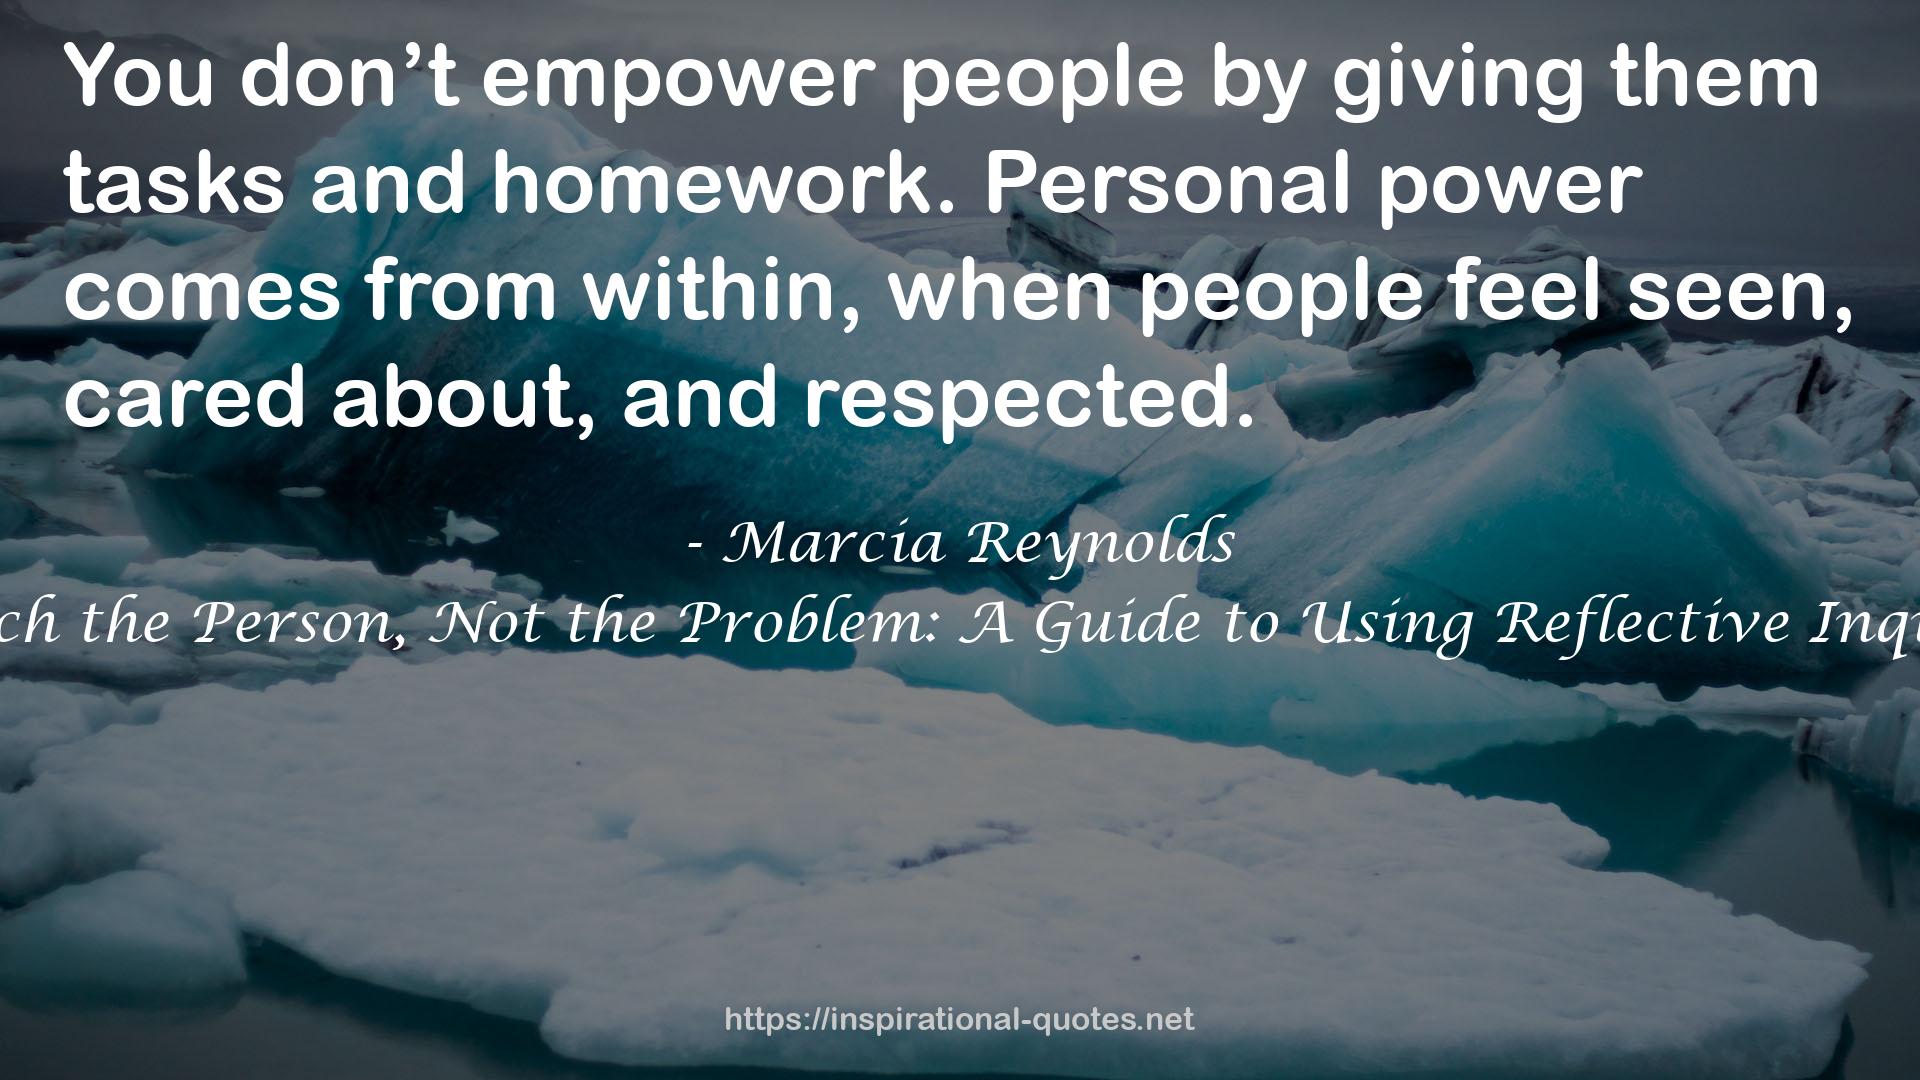 Marcia Reynolds QUOTES